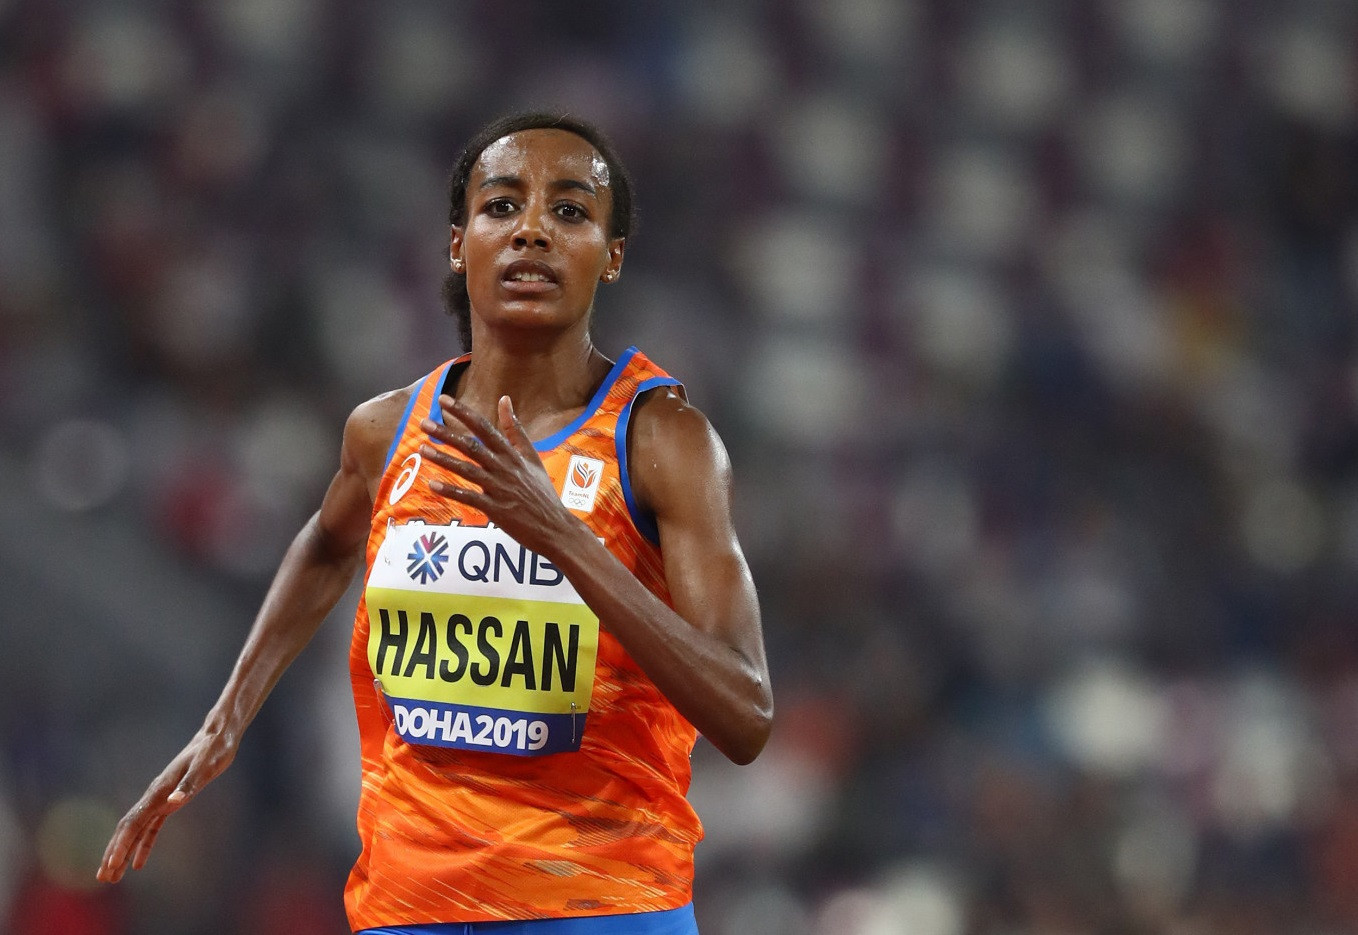 Double world champion Sifan Hassan will race world marathon record holder Brigid Kosgei as they seek the one-hour world record in Brussels tomorrow night ©Getty Images